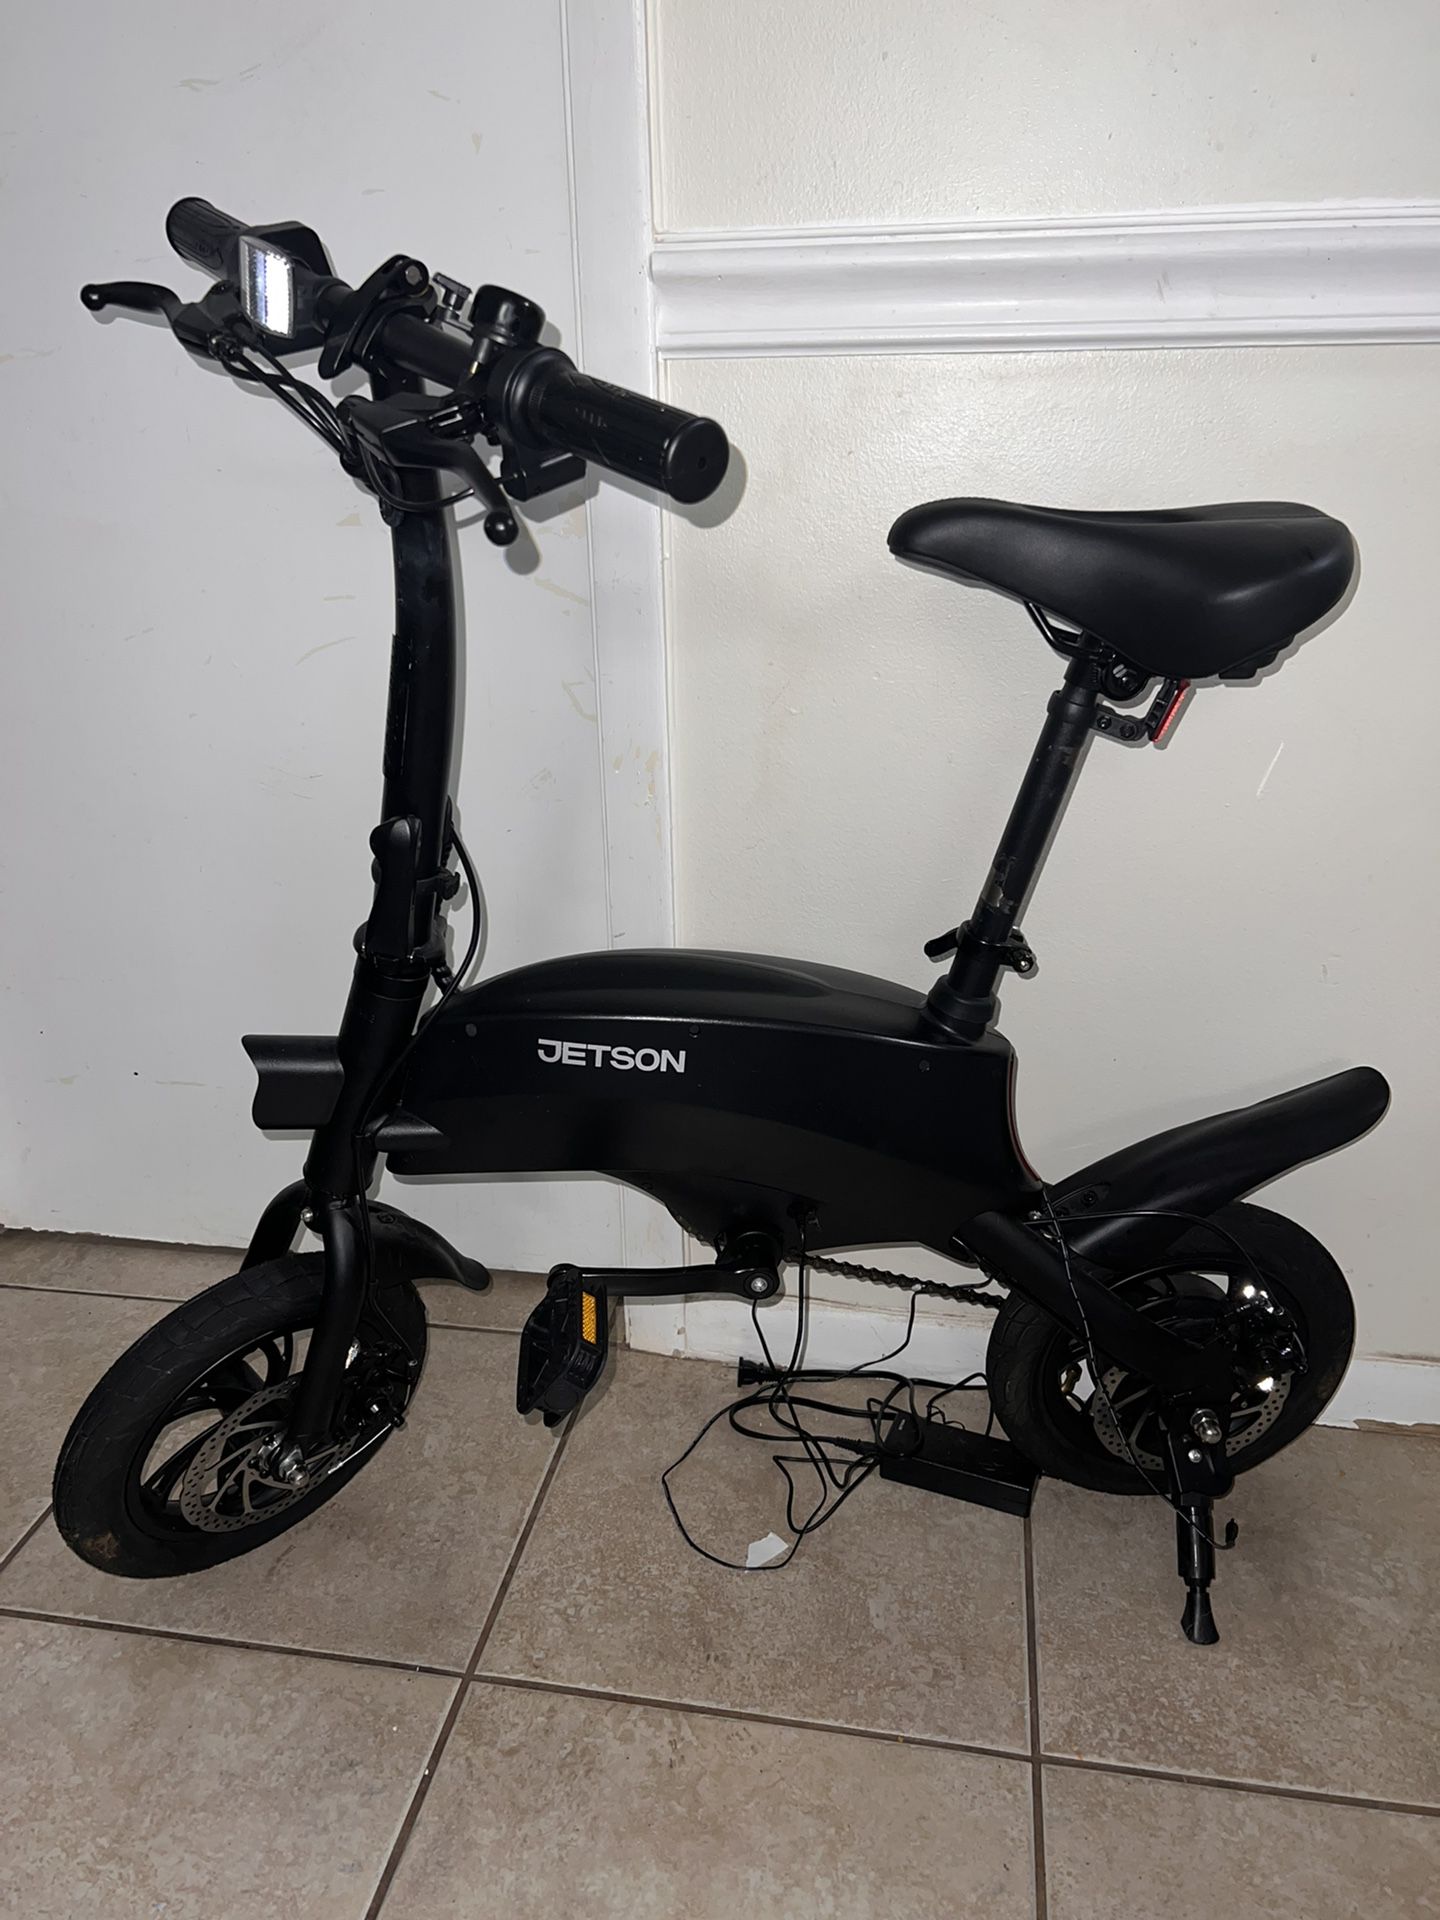 Jetson Electric Bike/ Scooter 